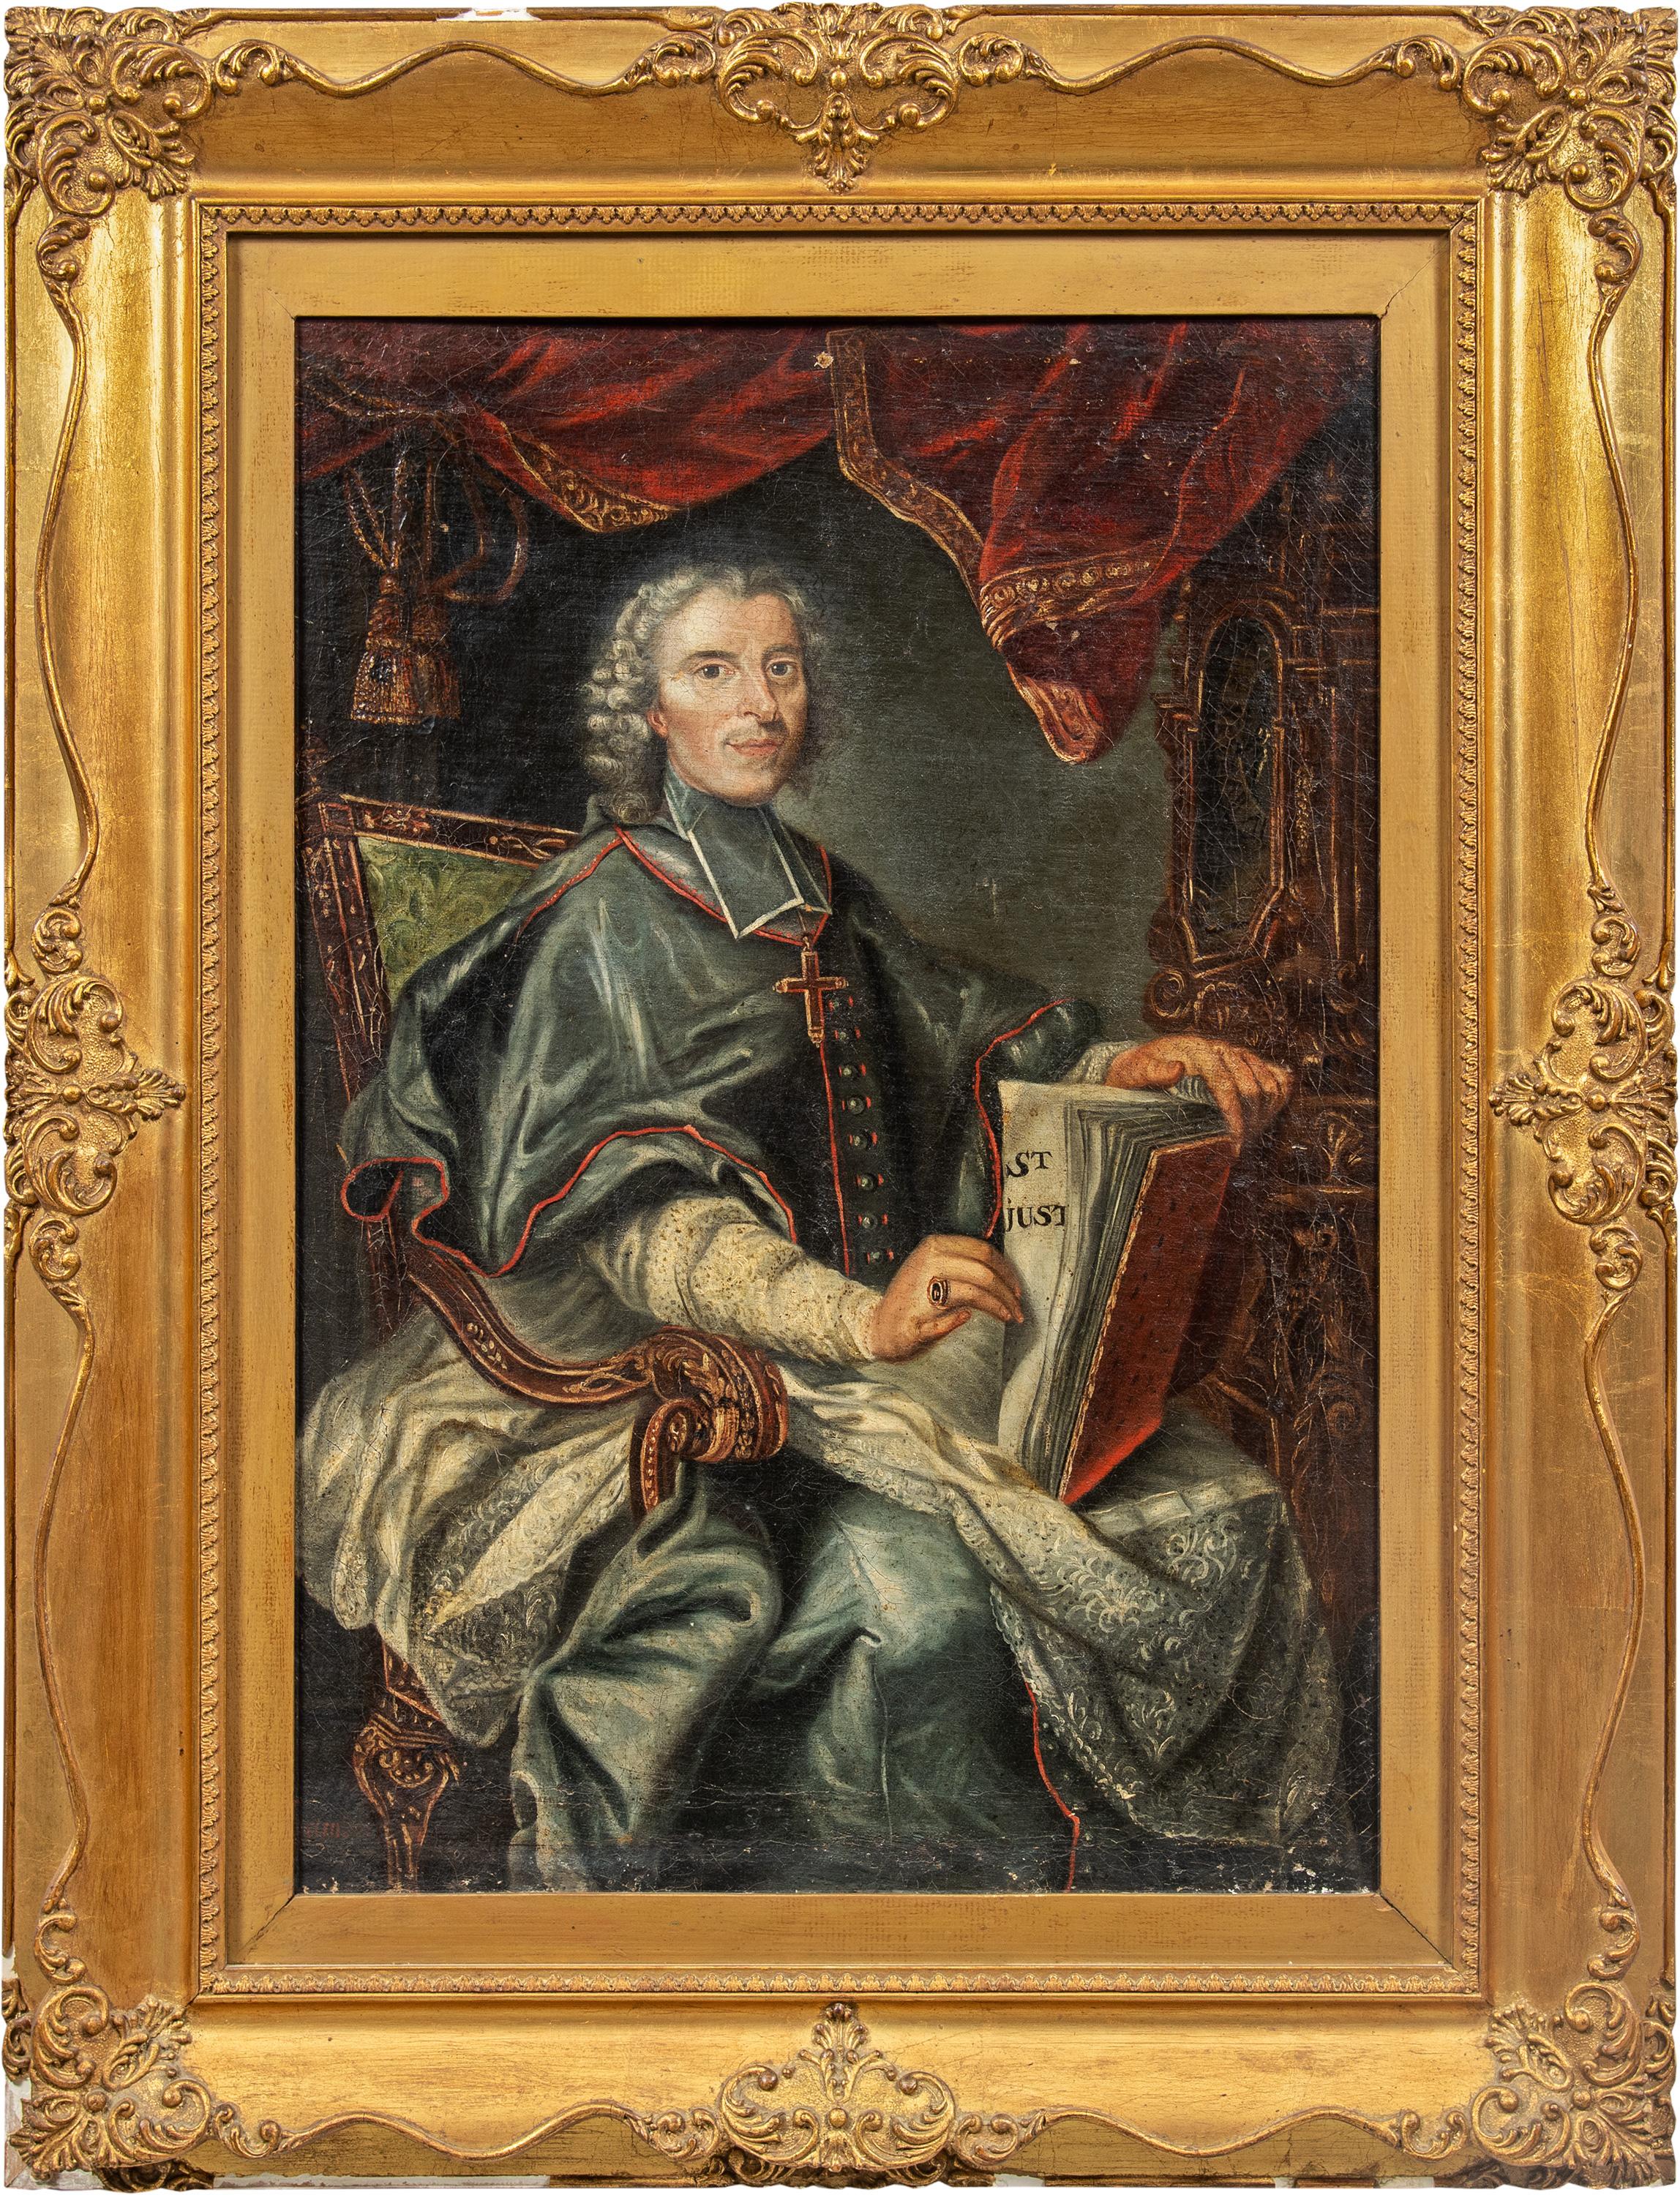 Circle of Joachim Rupalley (Bayeux 1713 - 1780) - San Giusto.

64 x 45 cm without frame, 87 x 66.5 cm with frame.

Antique oil painting on canvas, in carved and gilded wooden frame.

- Work inscribed on the book: “St. Just”.

- The work is inspired